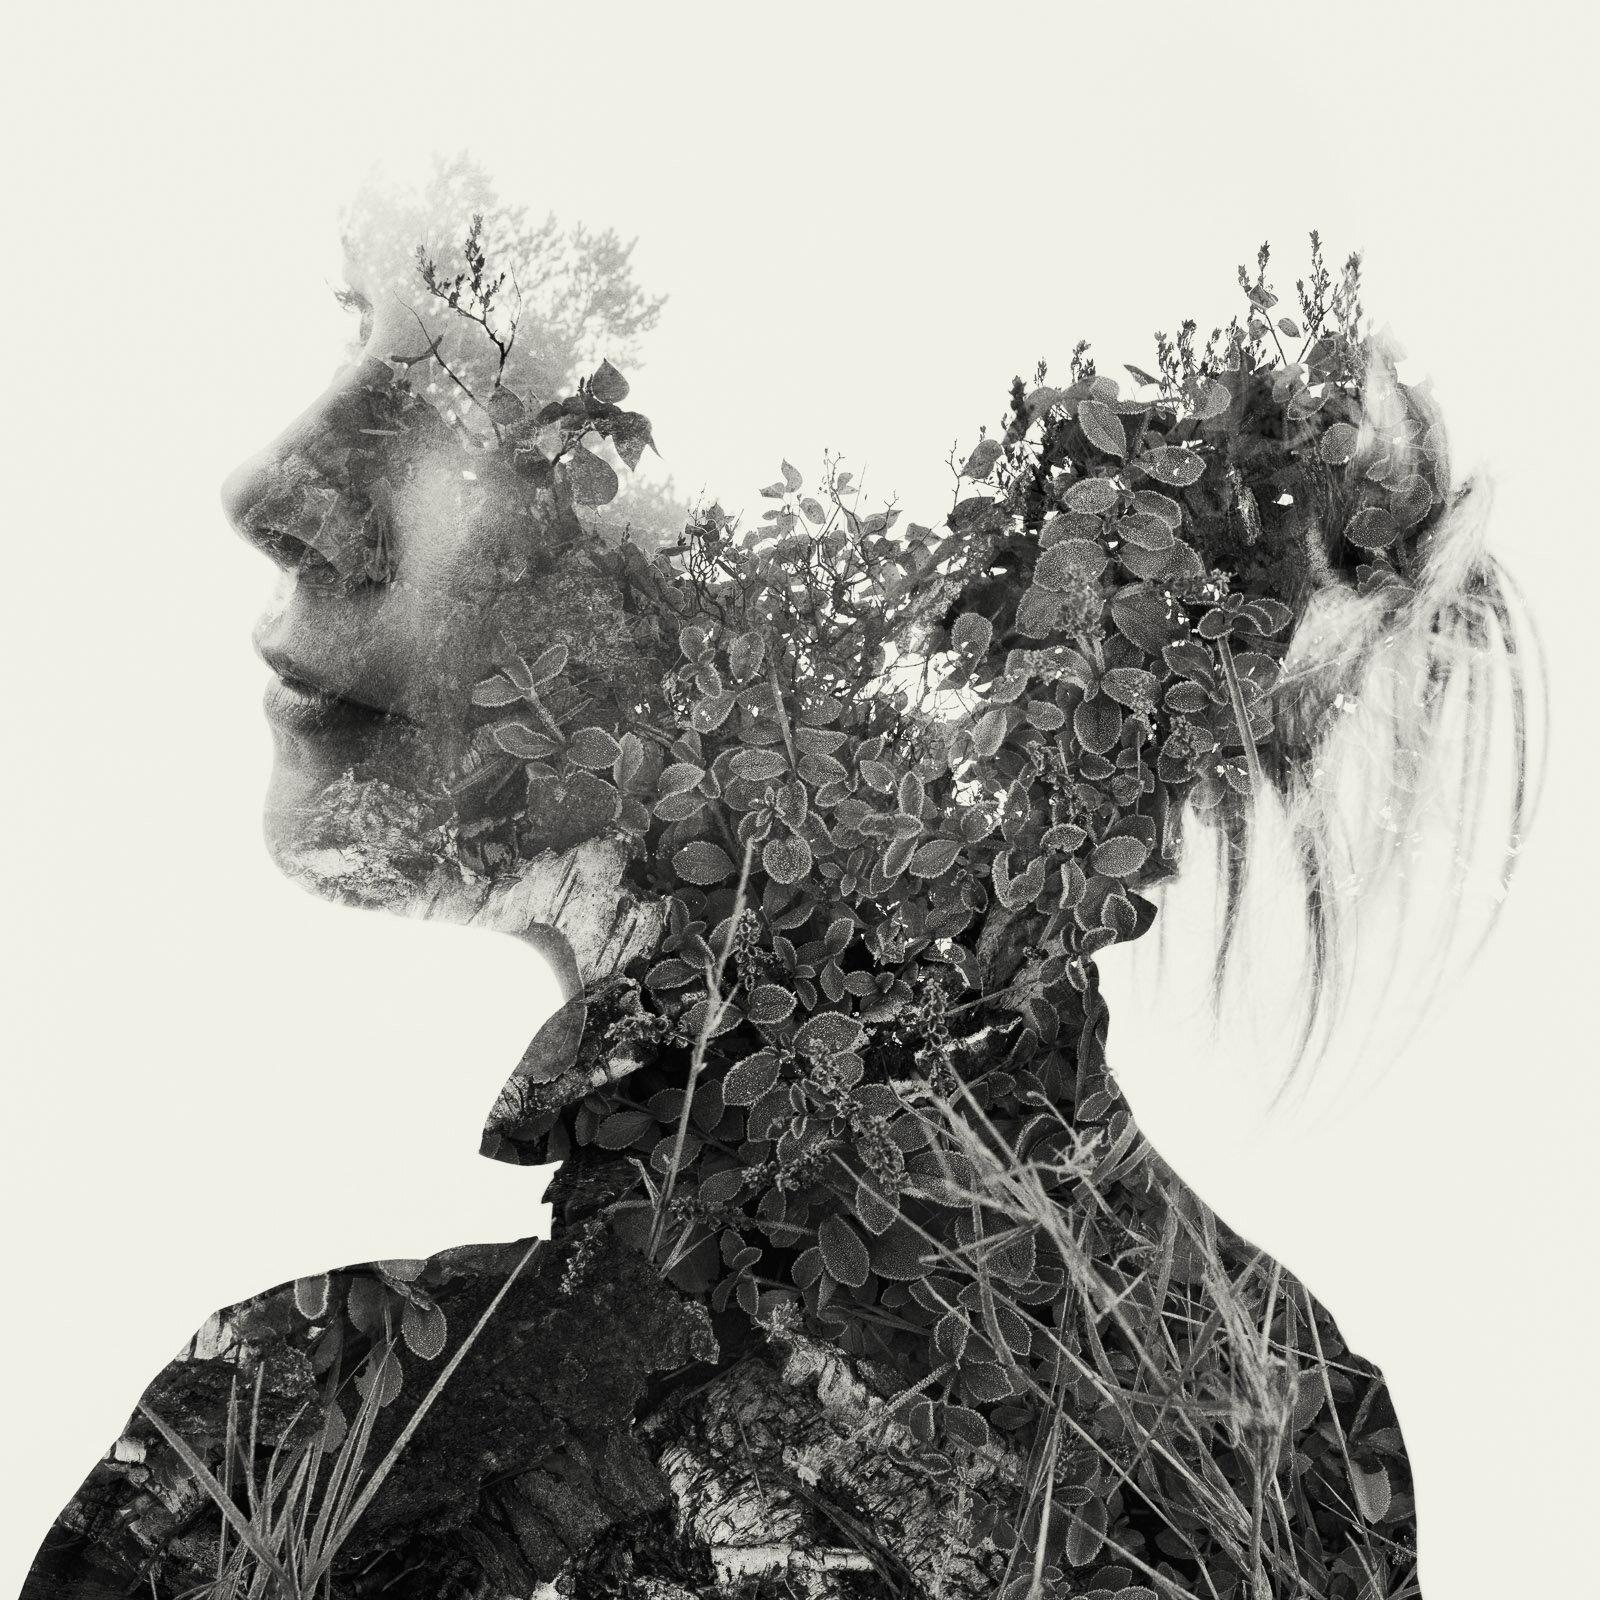 Christoffer Relander Landscape Photograph - Frost and fog- black and white portrait and nature multi exposure photograph